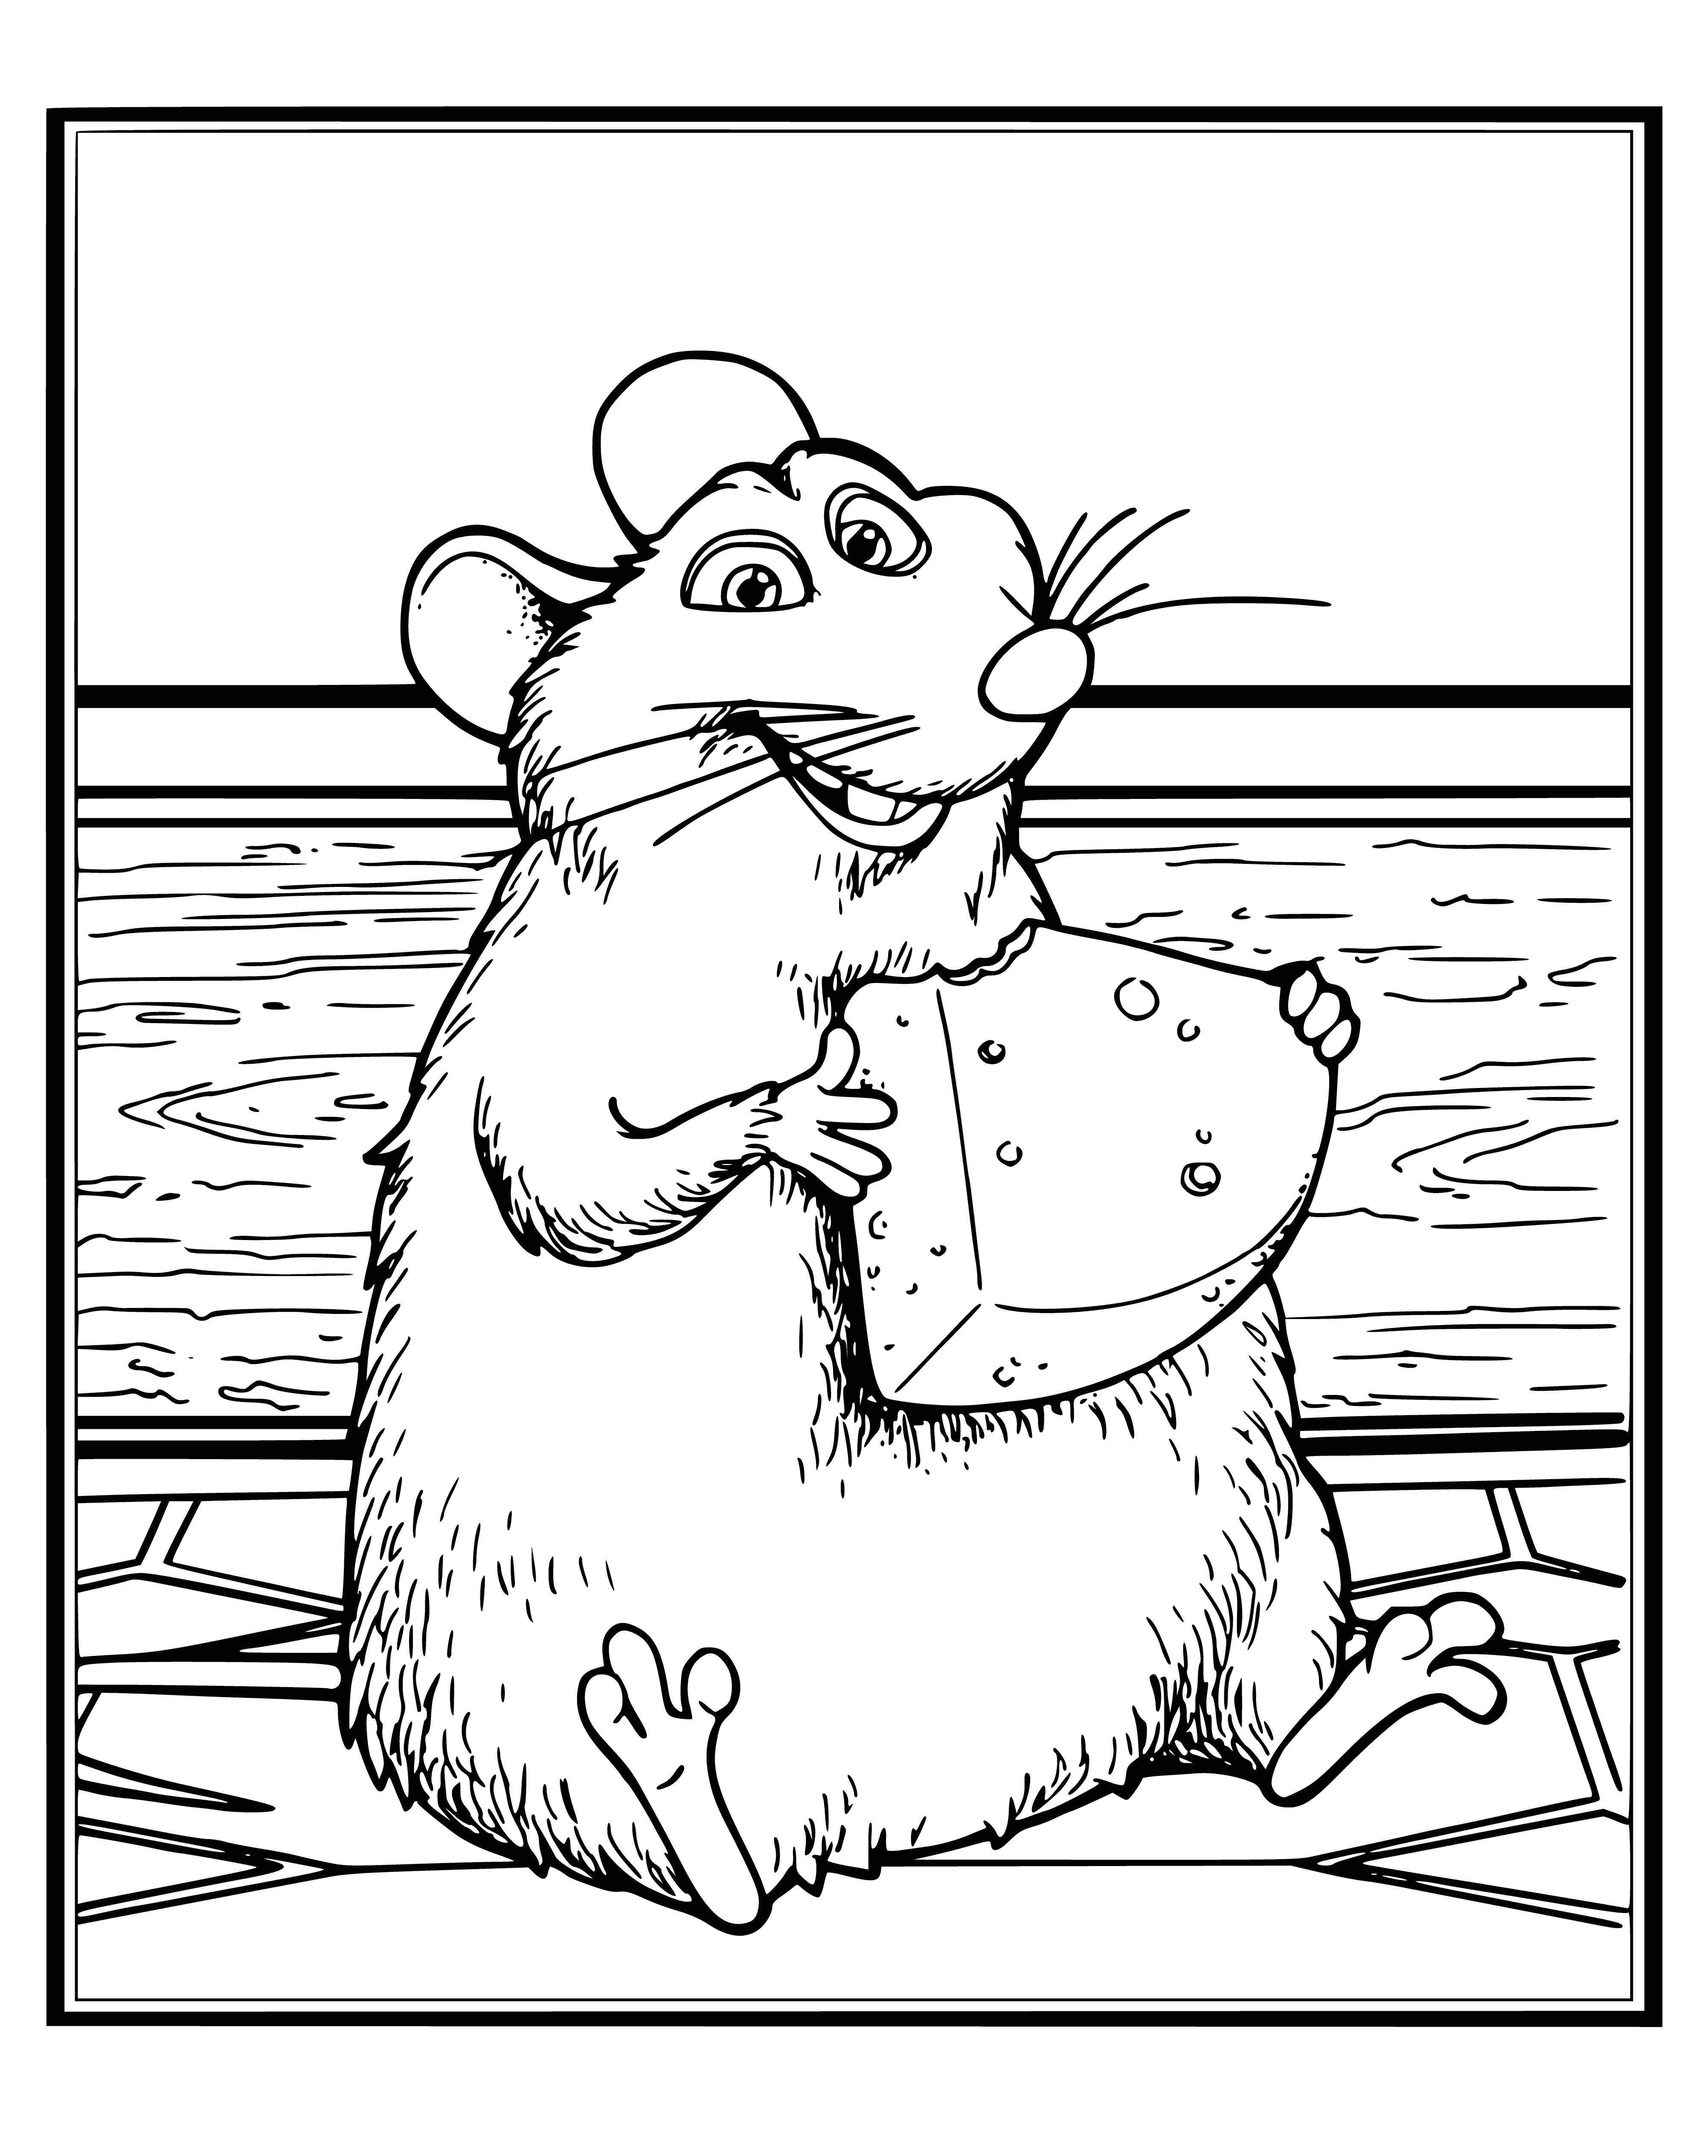 coloring page: Emil and Remi stand in a kitchen; Emil holds a rat and Remi looks on in disgust.